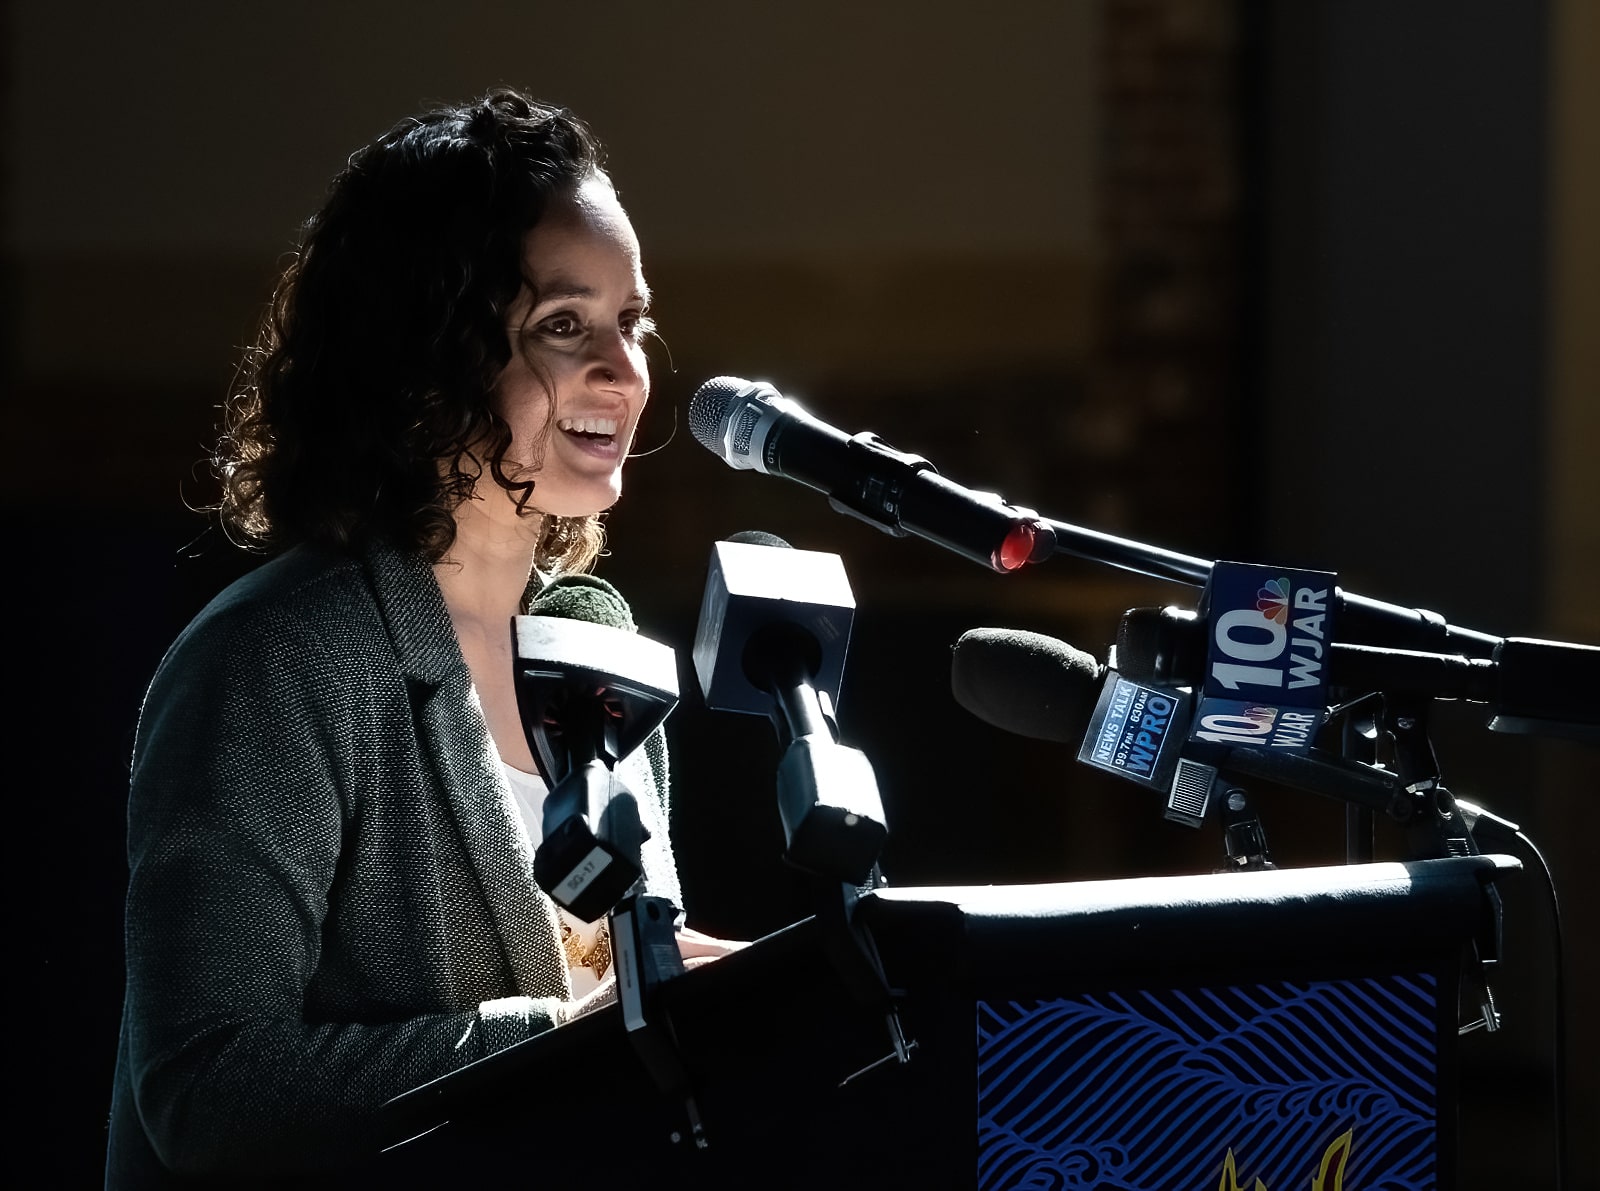 Anusha Venkataraman, the new managing director of CPO-HEZ, spoke about the importance of community organizations and art in community development and civic engagement. She spoke at the Roadmap release event on March 27, 2023. Photo by Stephen Ide/ONE|NB